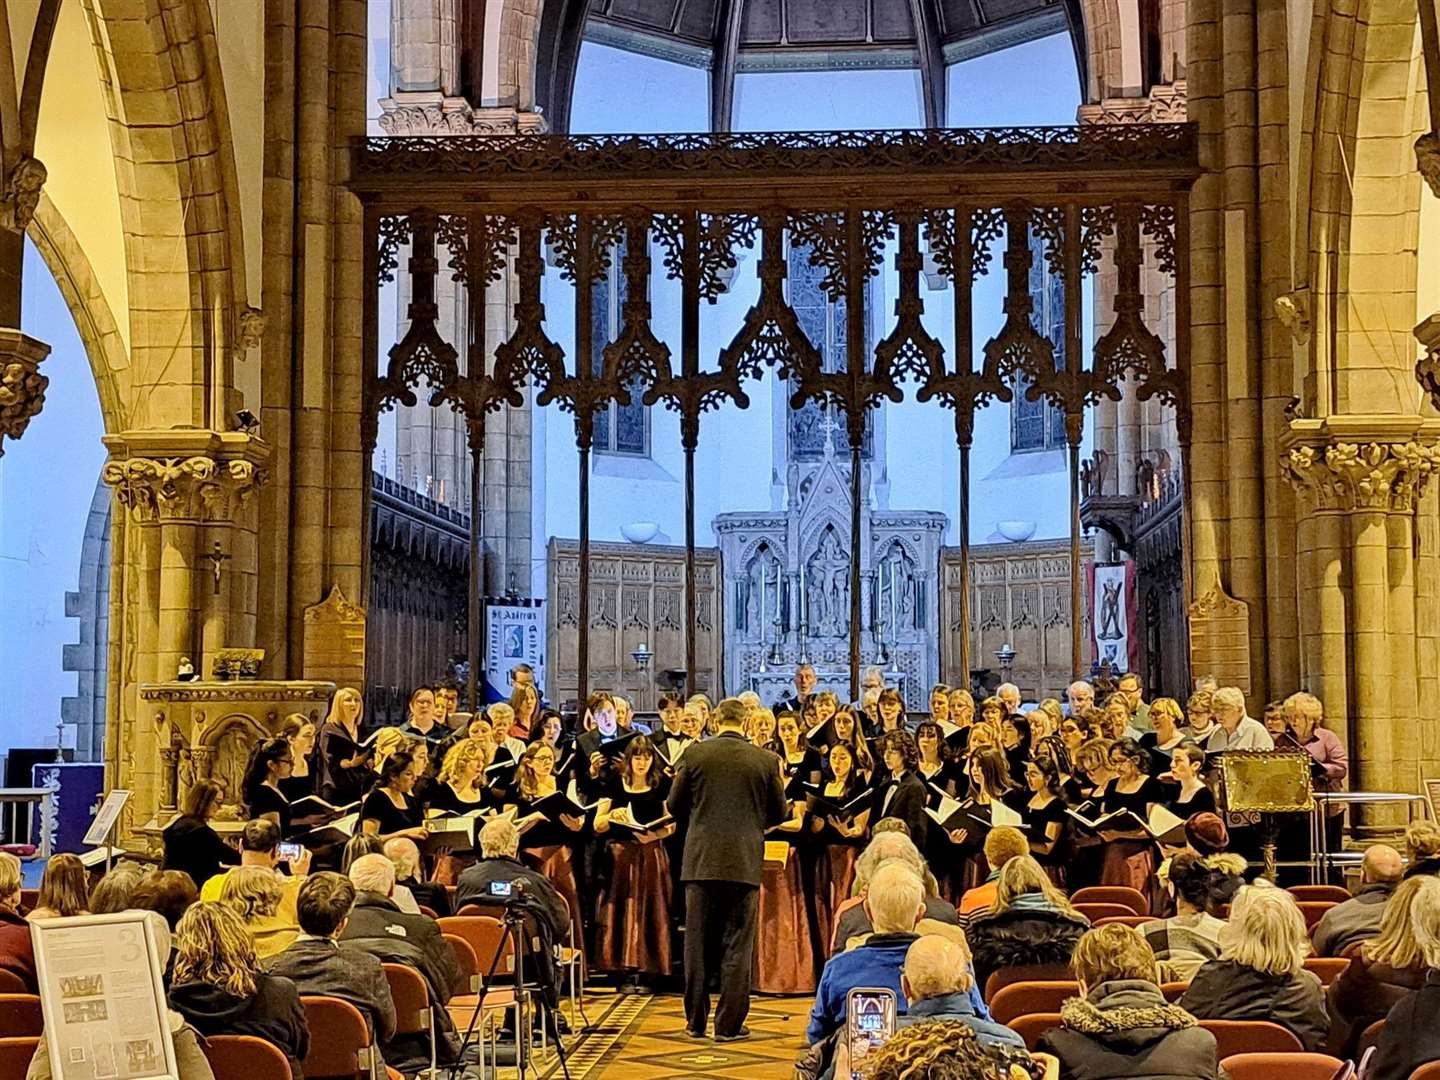 Choir singing at inverness Cathedral raises funds for Highland Hospice.